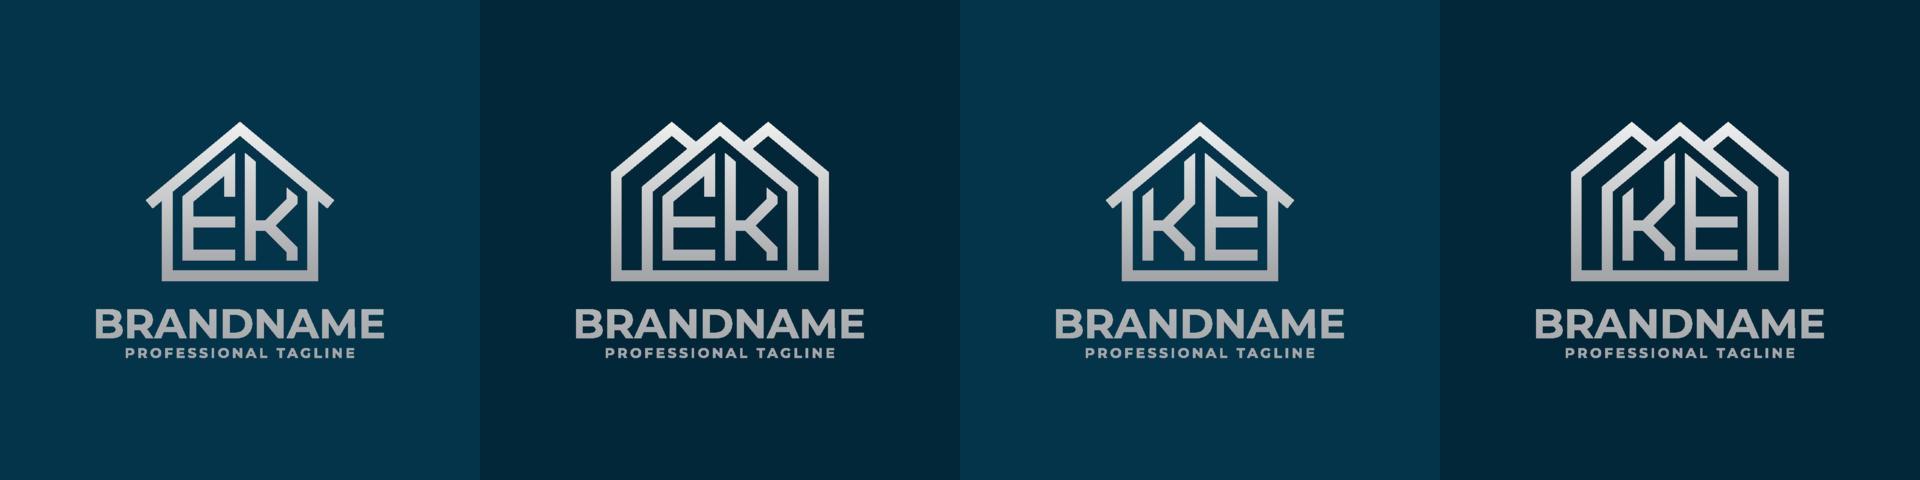 Letter EK and KE Home Logo Set. Suitable for any business related to house, real estate, construction, interior with EK or KE initials. vector